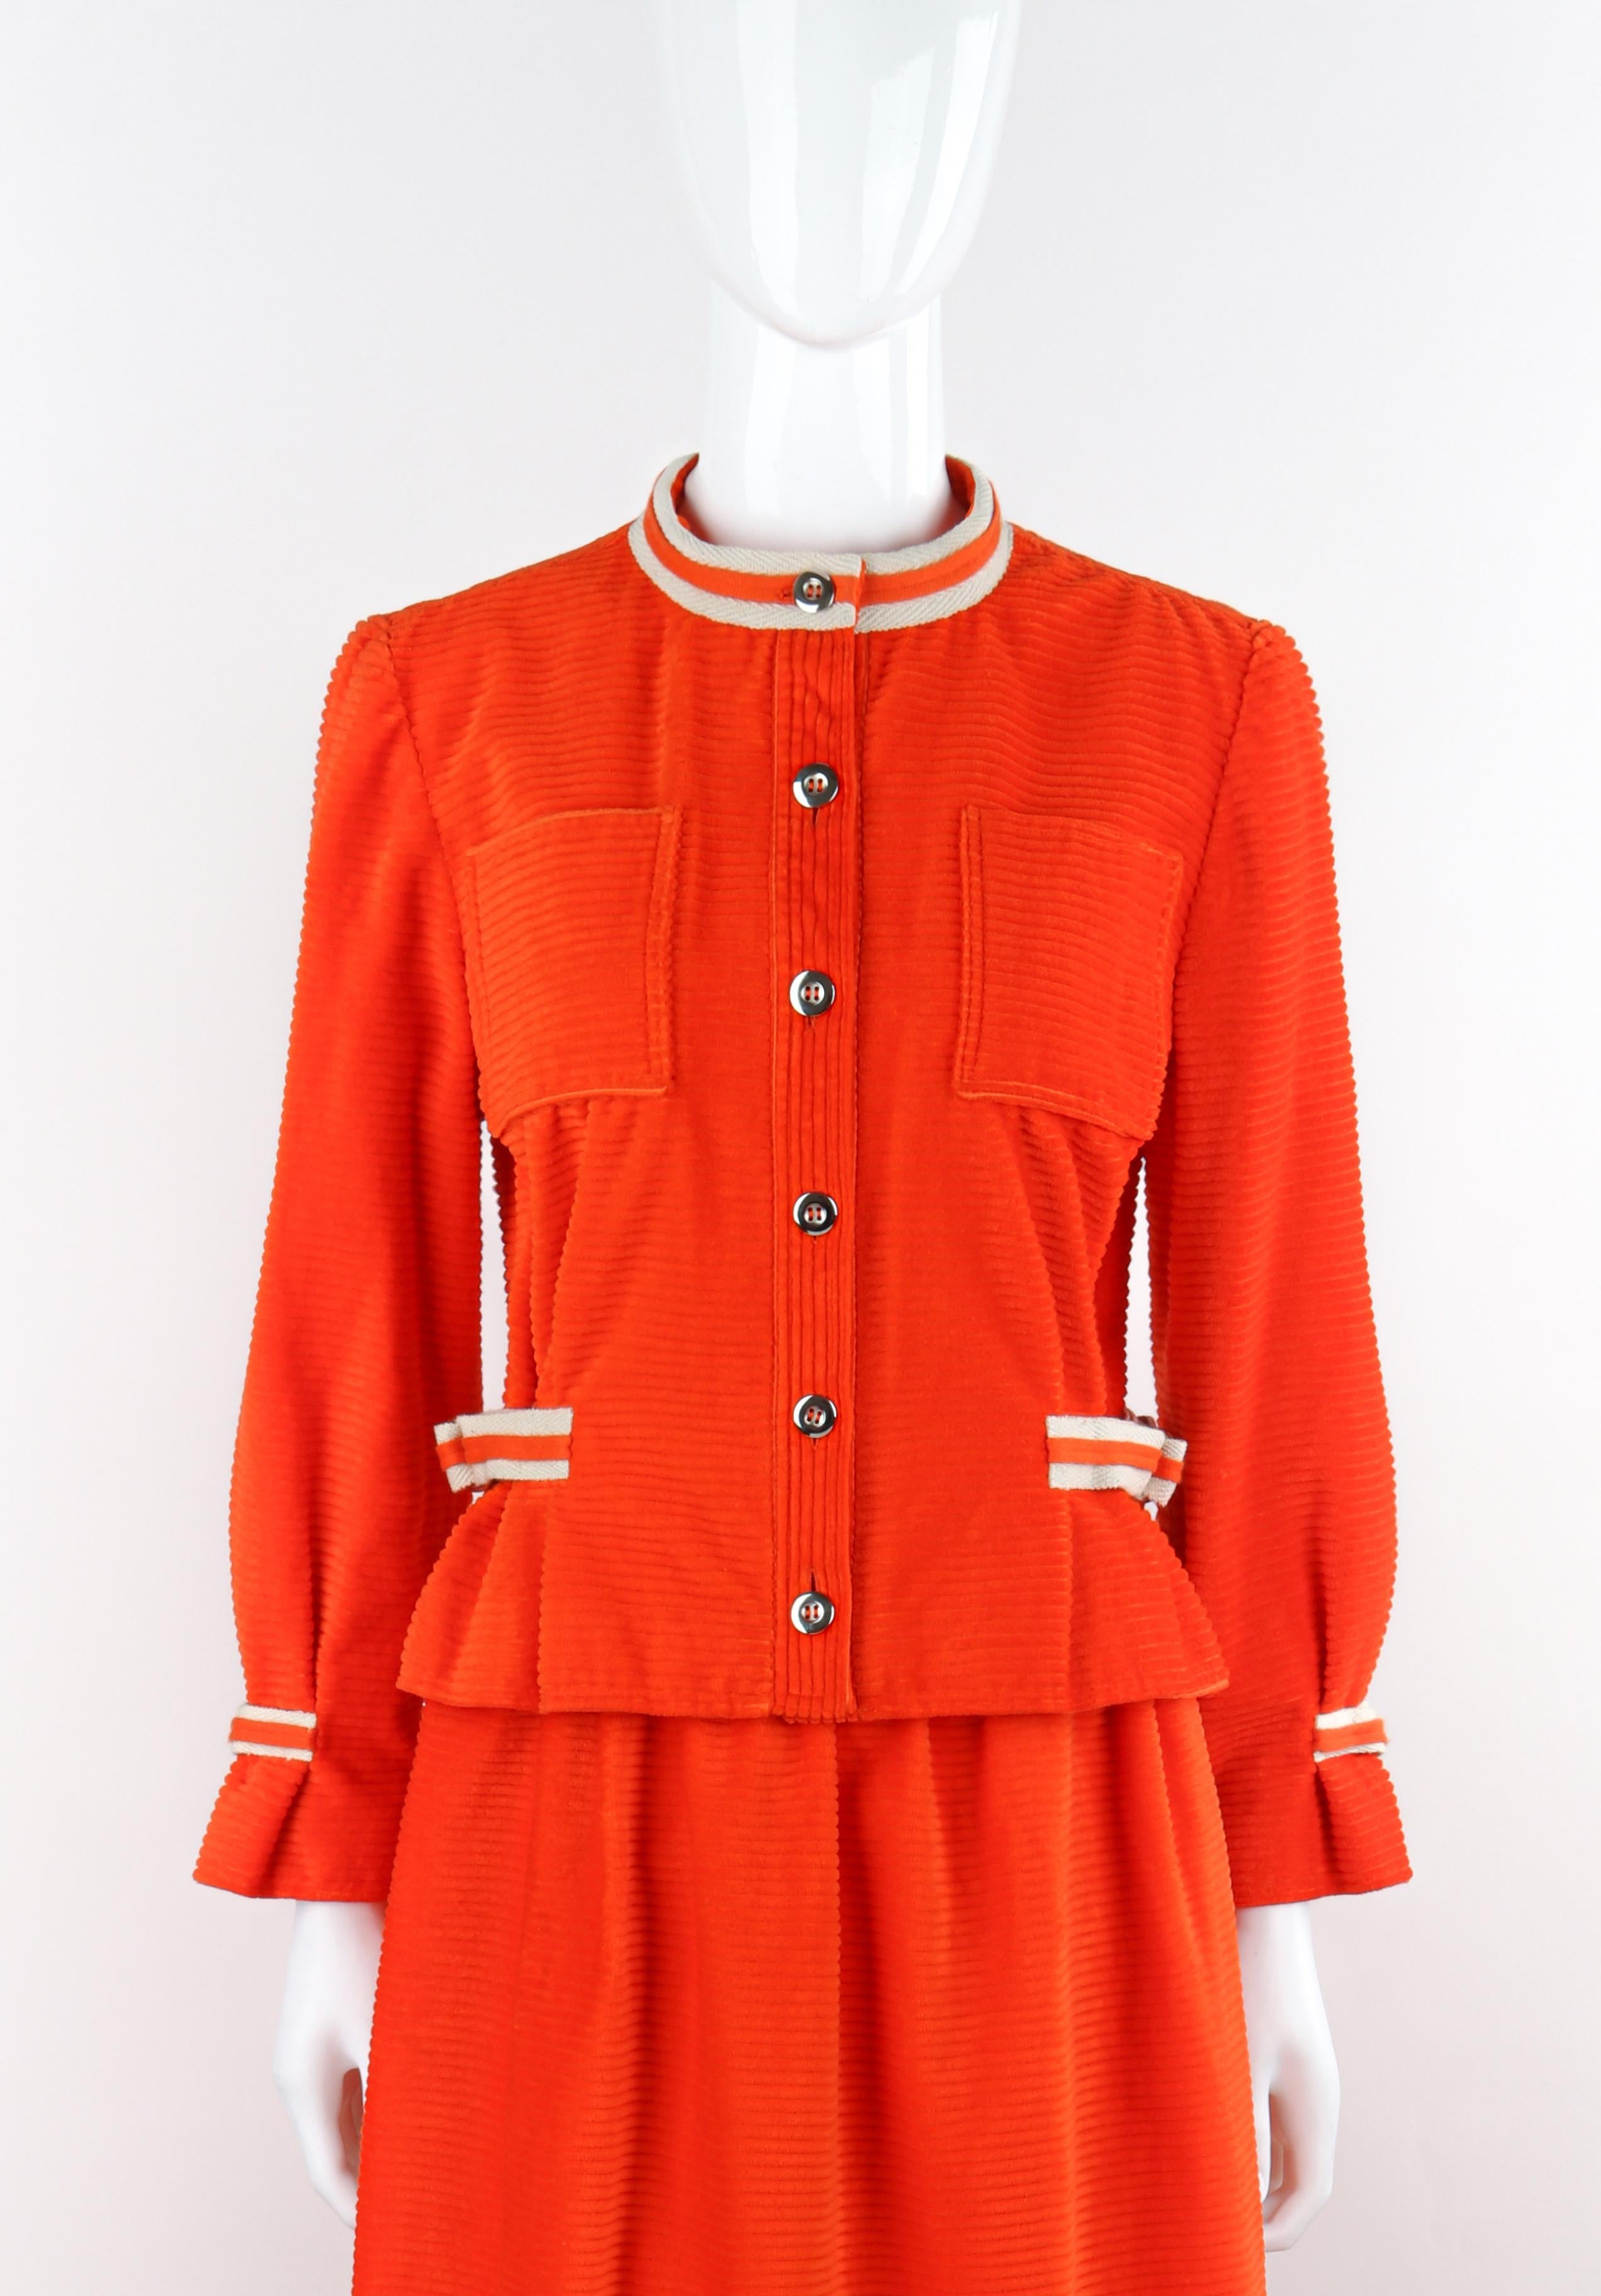 COURREGES c.1970's Orange Corduroy Button Up Jacket Blazer Skirt Suit Set w/Tags In Excellent Condition For Sale In Thiensville, WI